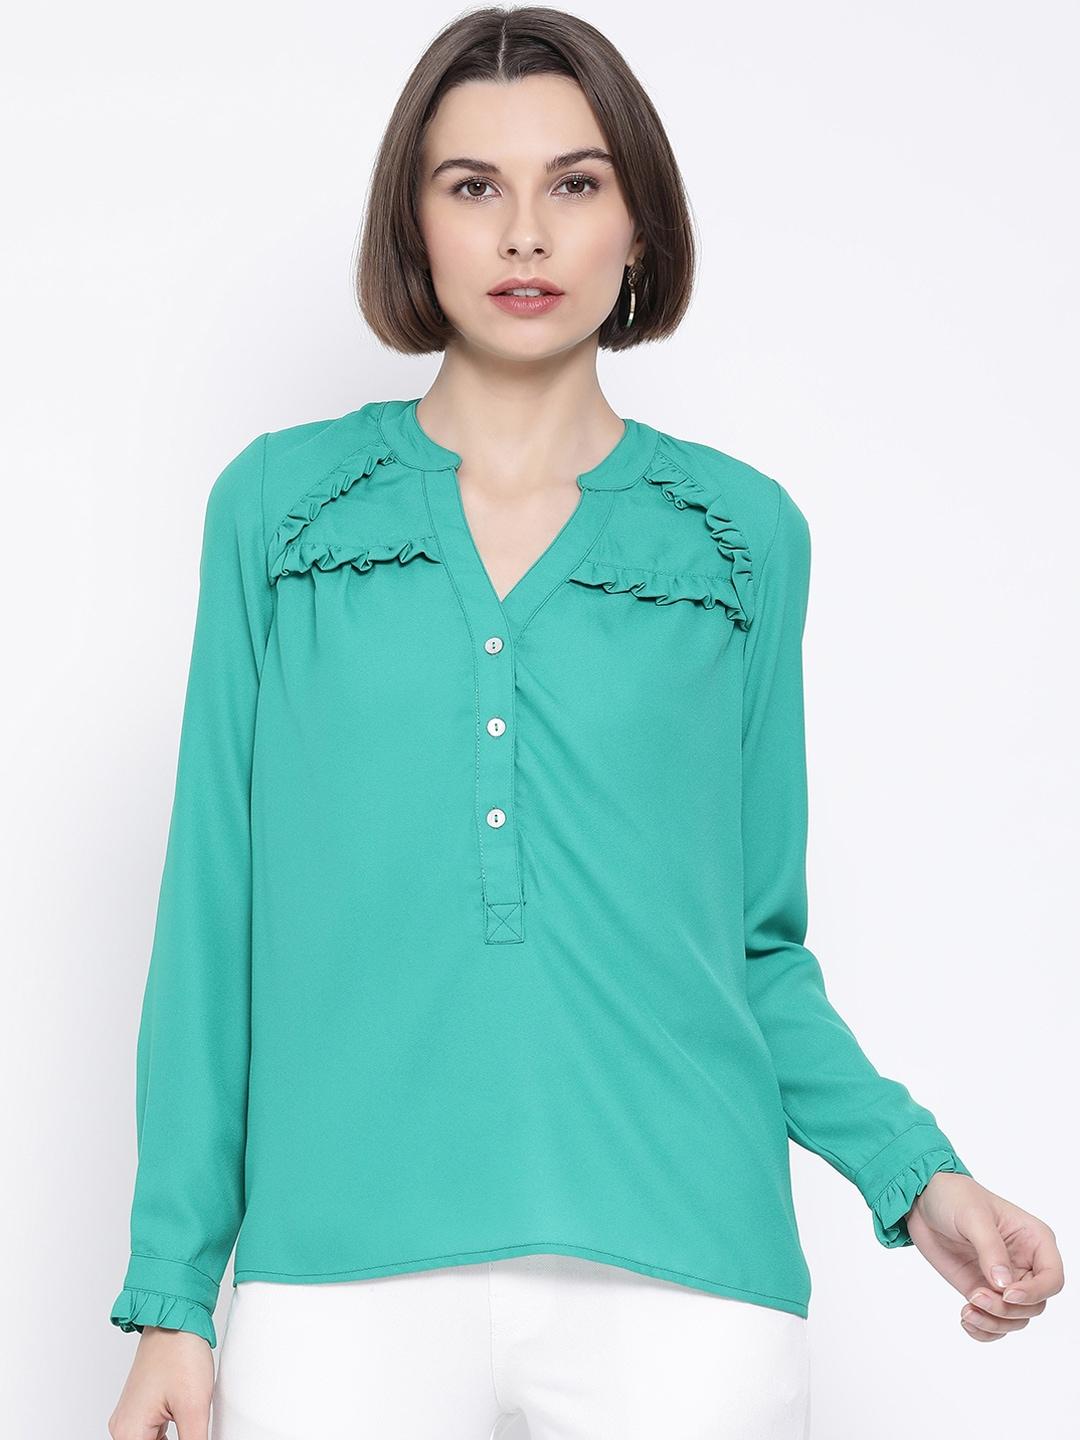 oxolloxo-women-green-solid-shirt-style-top